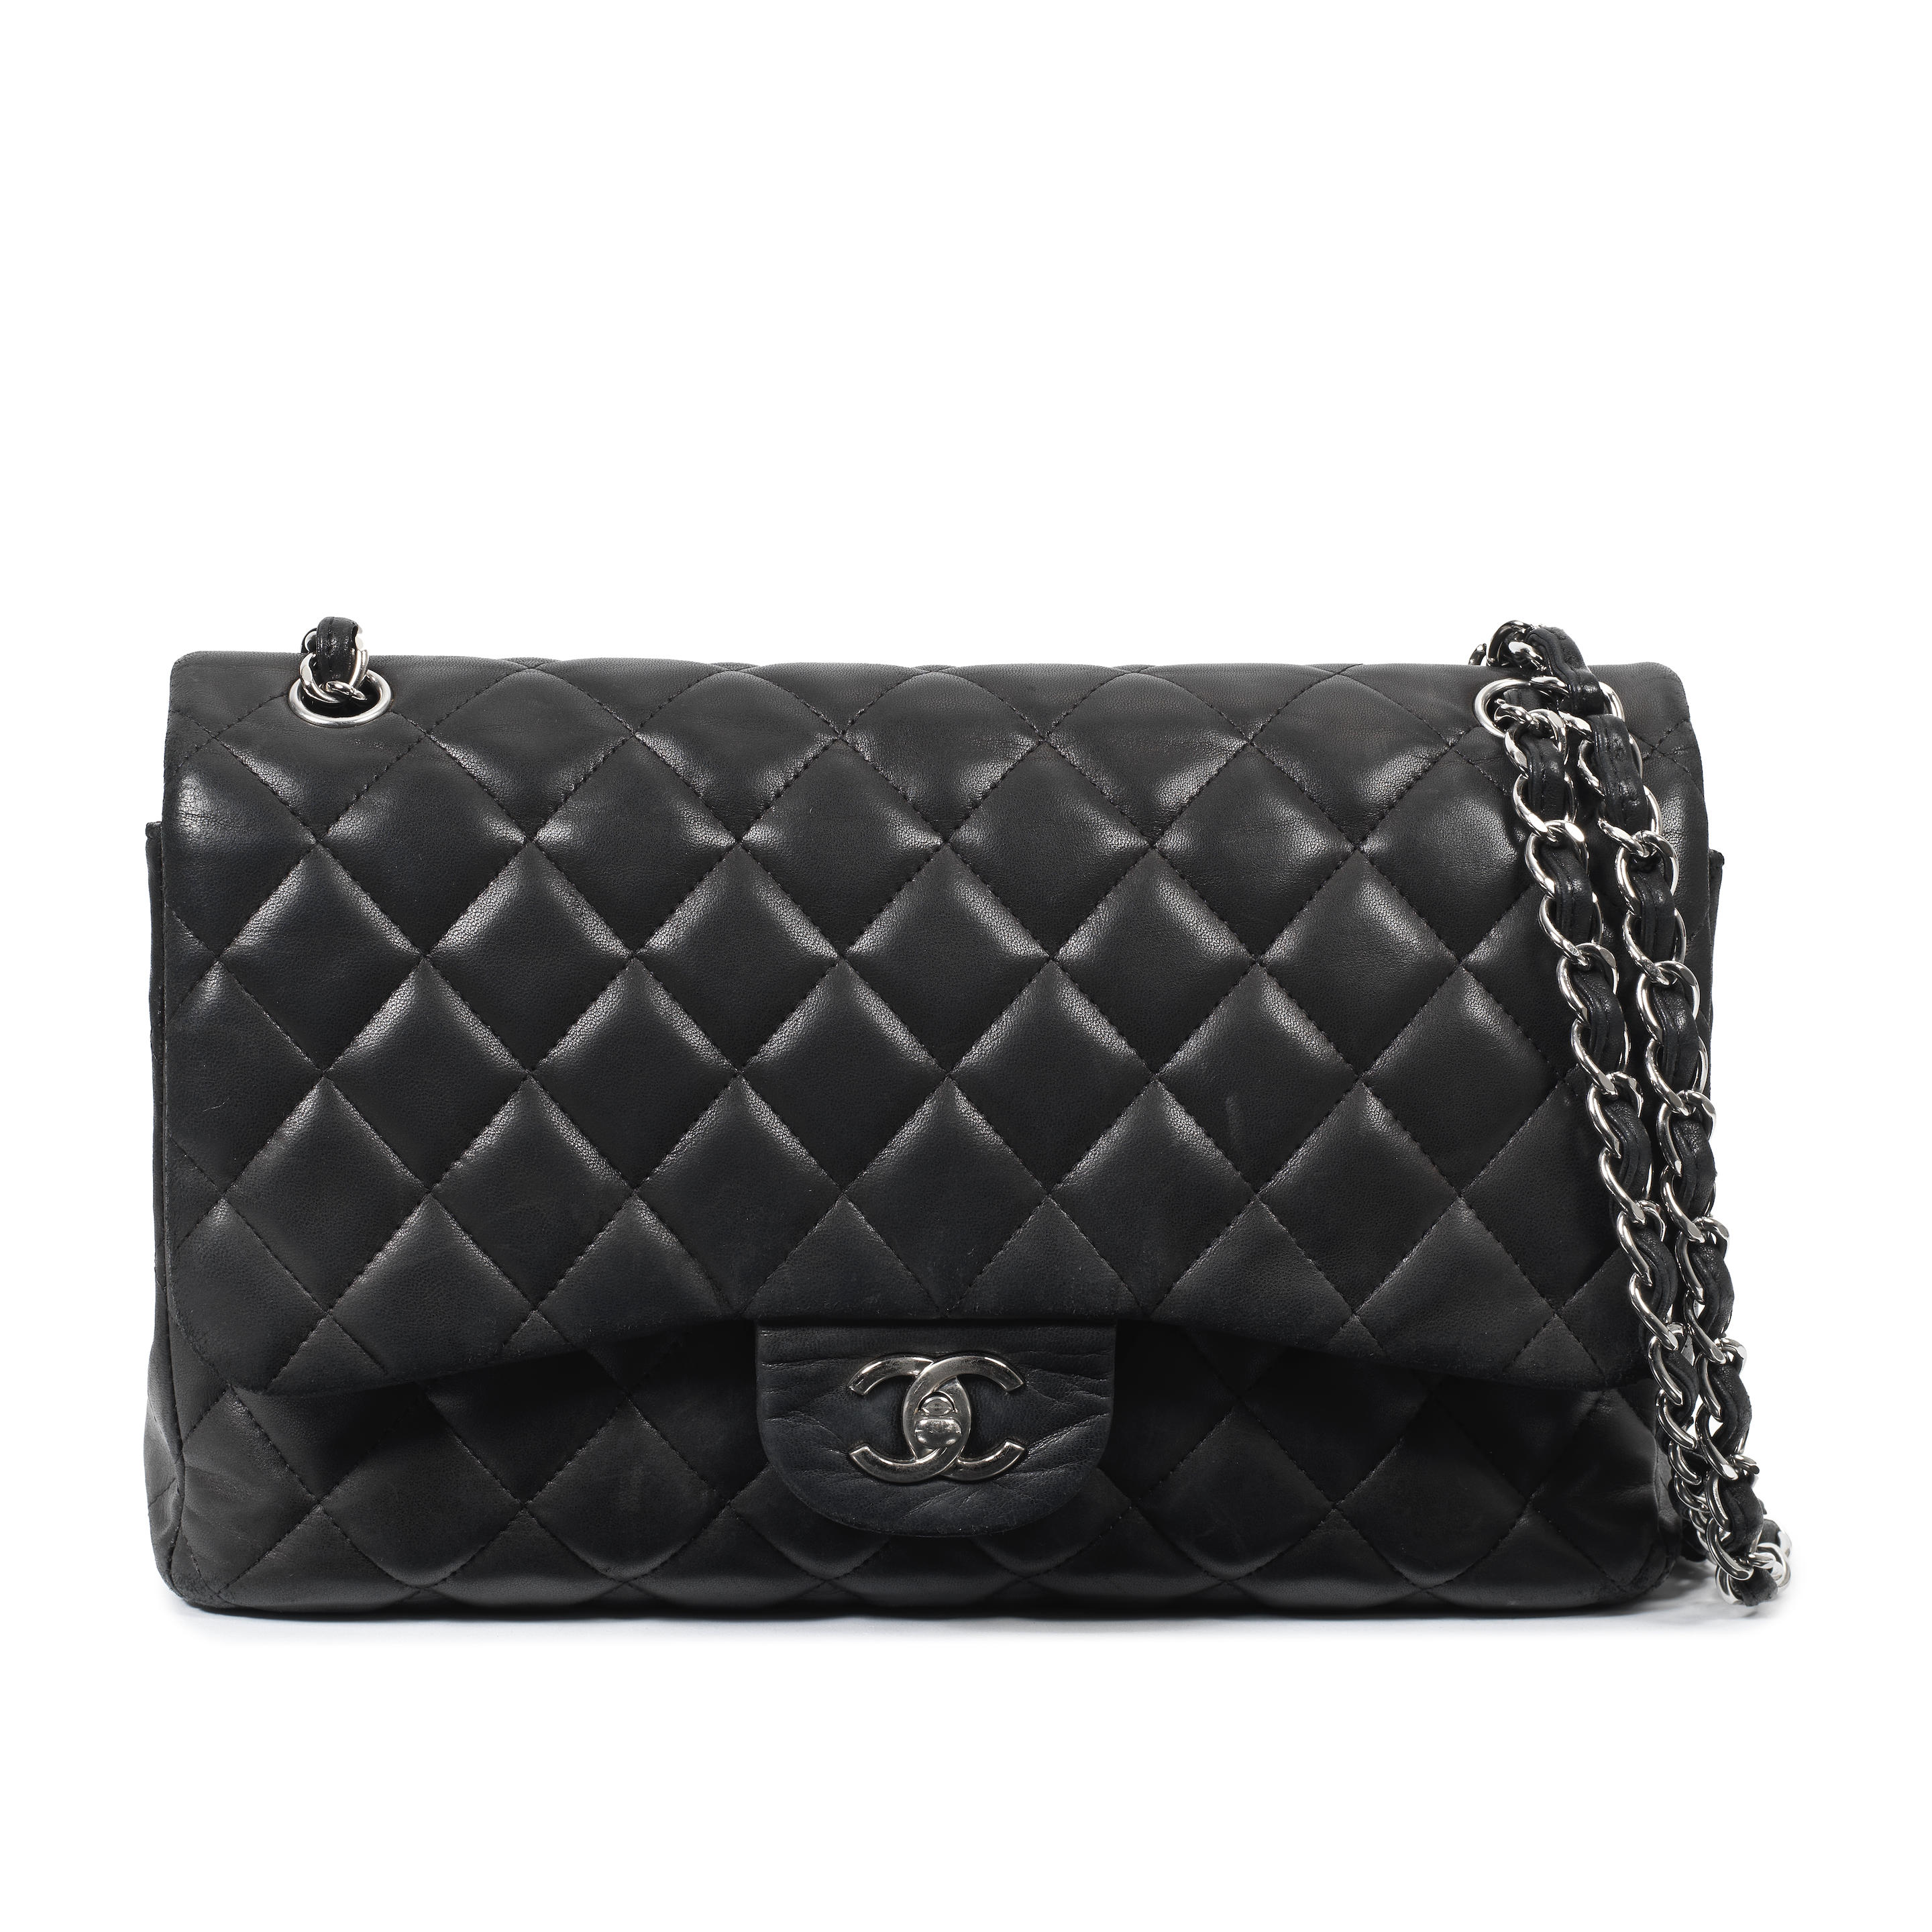 10 amazing handbags in Heritage's May Luxury Accessories Auction -  Alain.R.Truong